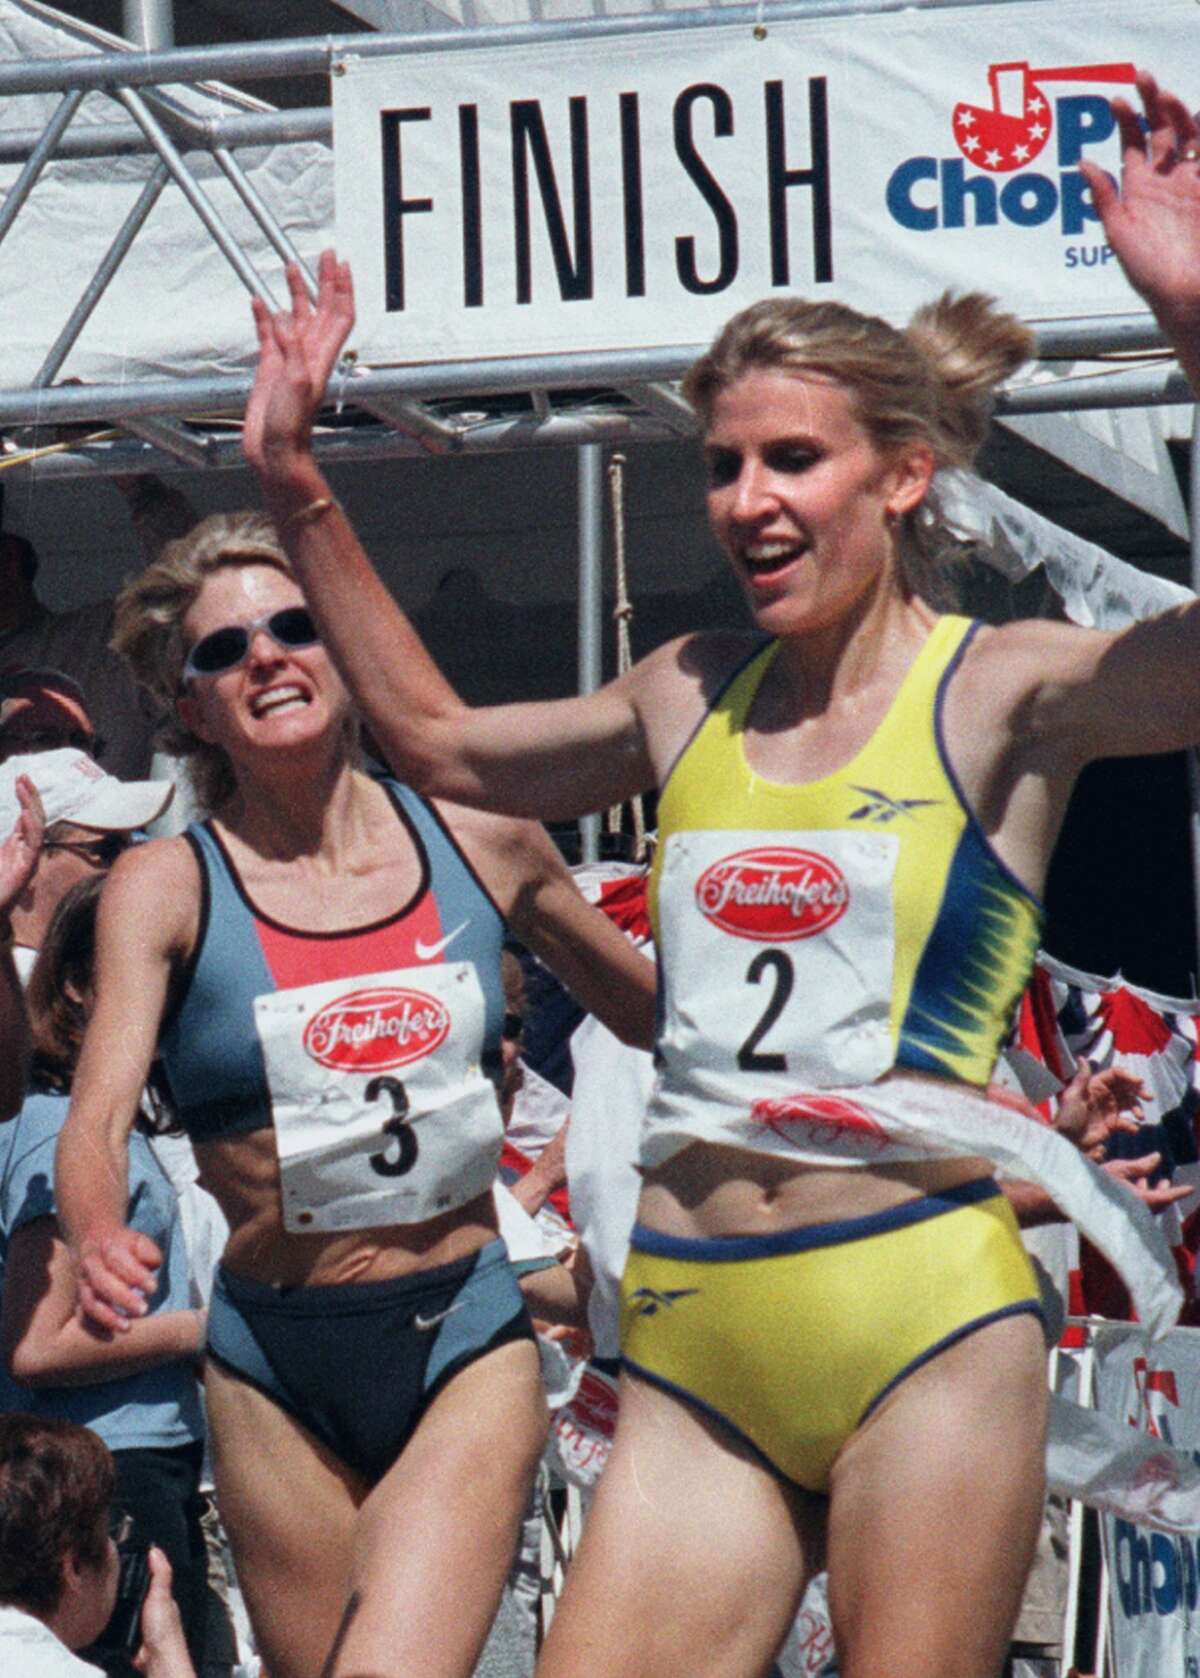 Times Union Staff Photo by STEVE JACOBS , 6/5/99, Albany,NY-- TO THE FINISH -- Friehofer womens race first place finisher, Cheri Goddard-Kenah,right, crosses the tape as second place finisher, Libbie Hickman closely follows for a second place finish, Saturday ( for sports)